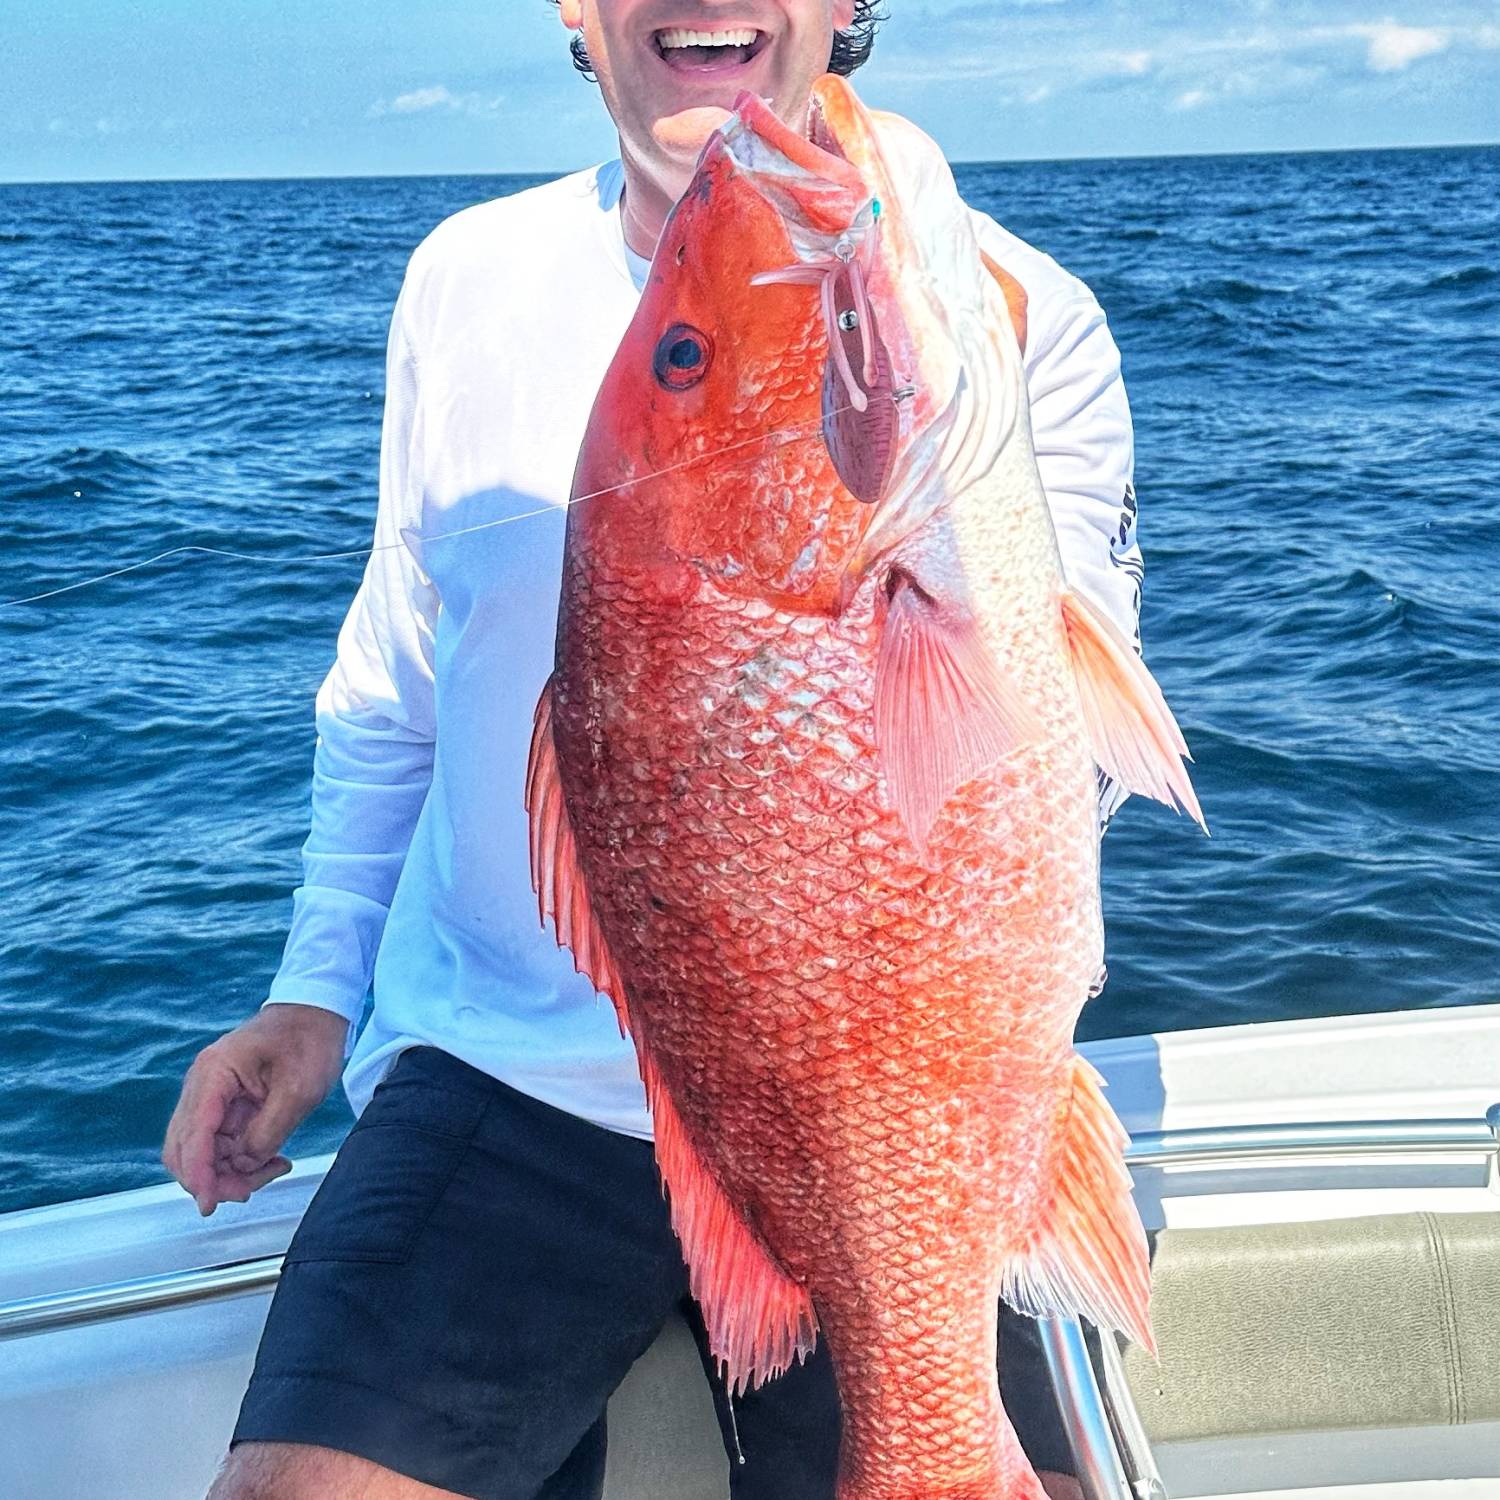 Title: Red Snapper - On board their Sportsman Open 212 Center Console - Location: Orange Beach Alabama. Participating in the Photo Contest #SportsmanDecember2023